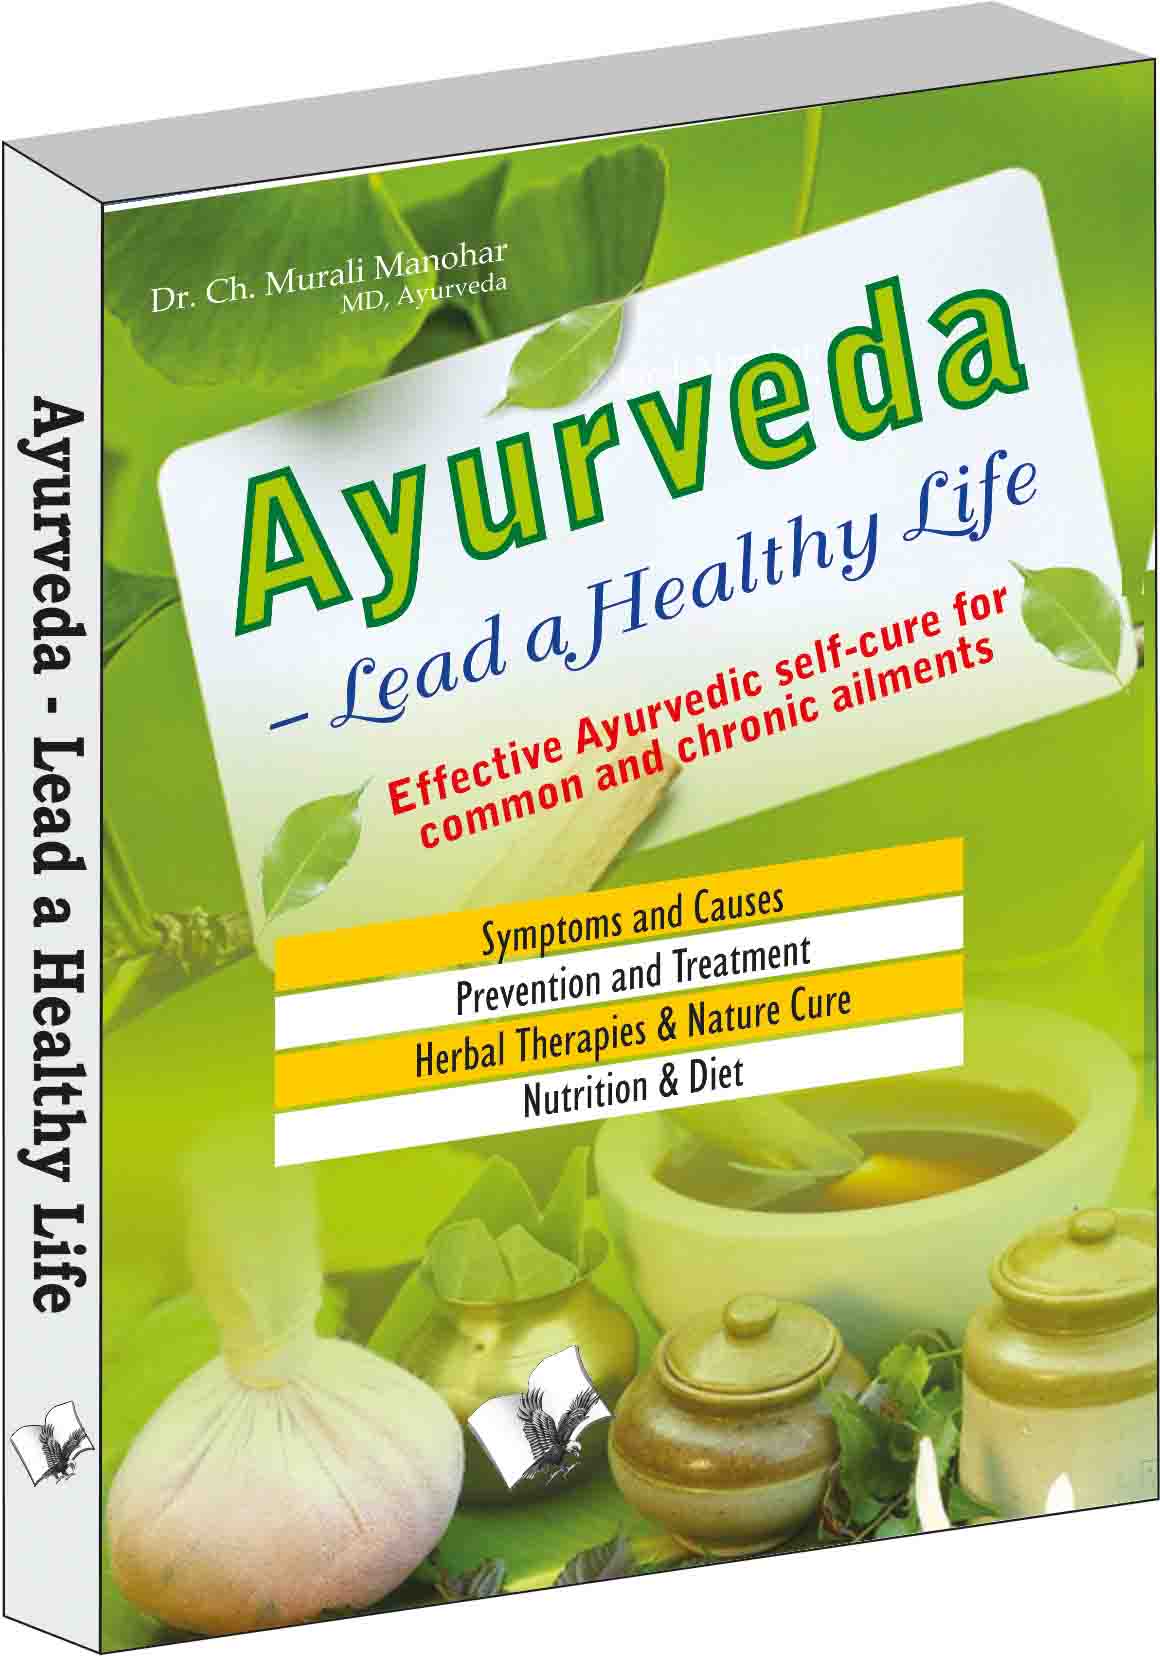 Ayurveda - Lead a Healthy Life-Effective Ayurvedic self-cure for
common and chronic ailments